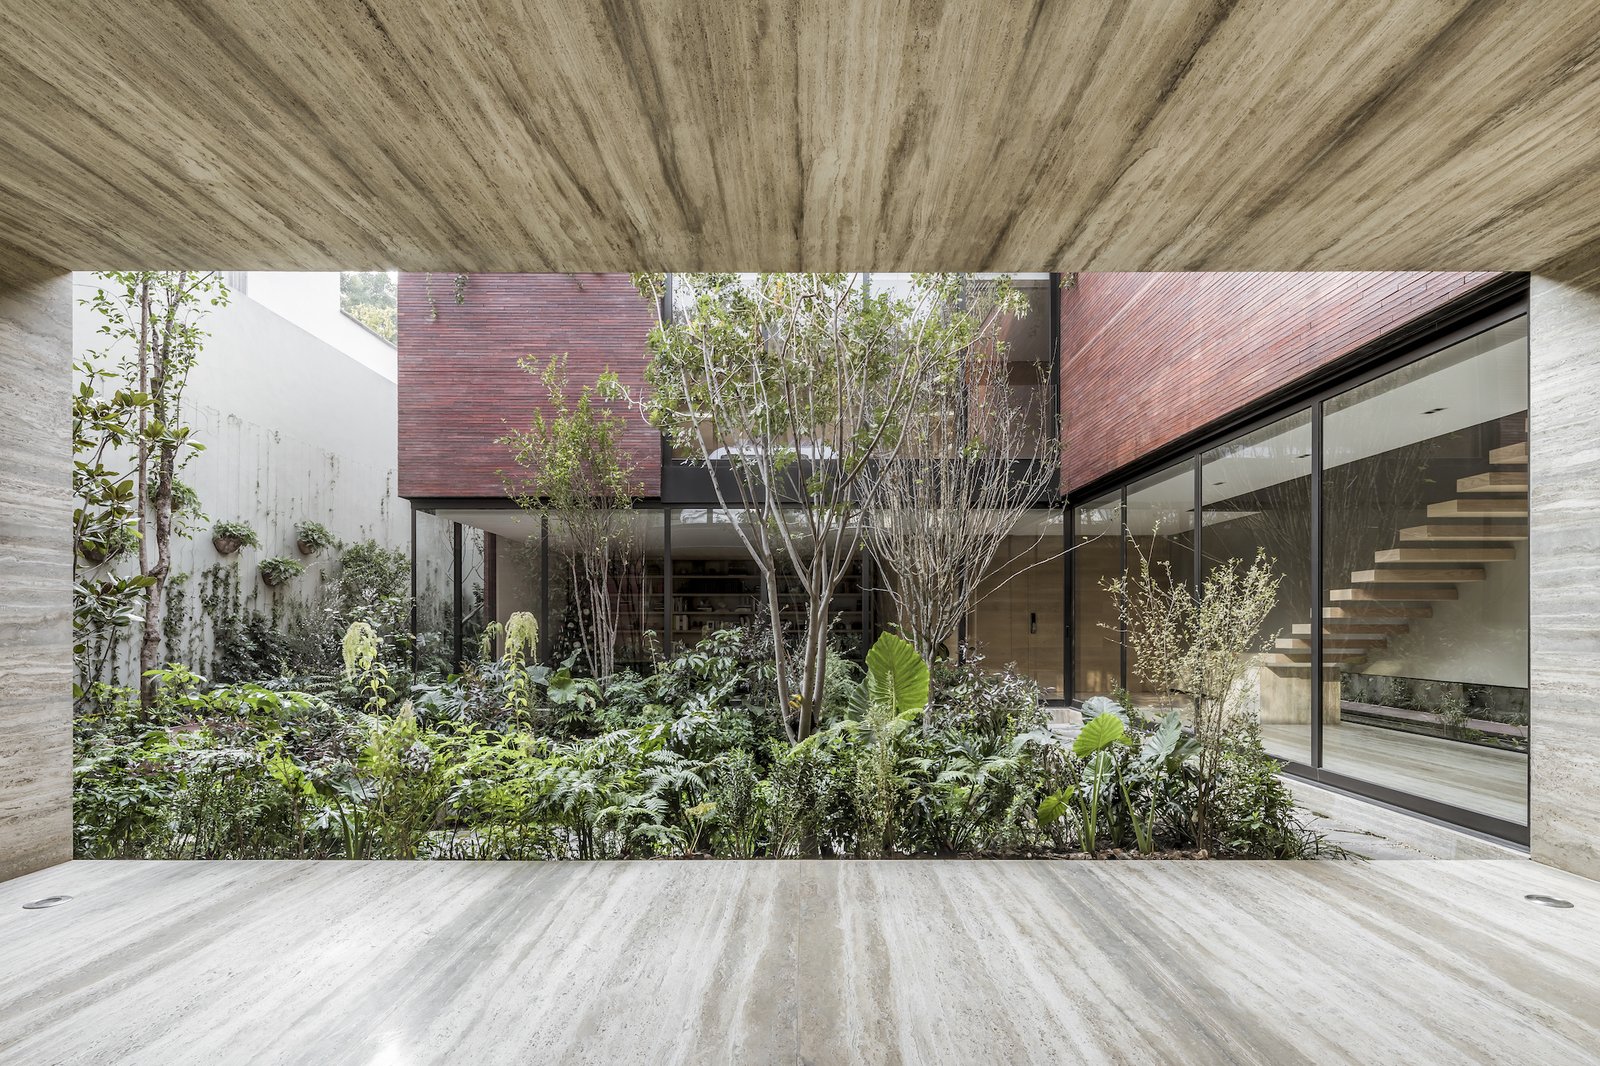 The landscaping was created in collaboration with landscape architecture studio Entorno. "They are extremely talented and have a deep knowledge and understanding of the right composition and best expression of the plants inside a space," says designer Hector Esrawe. 